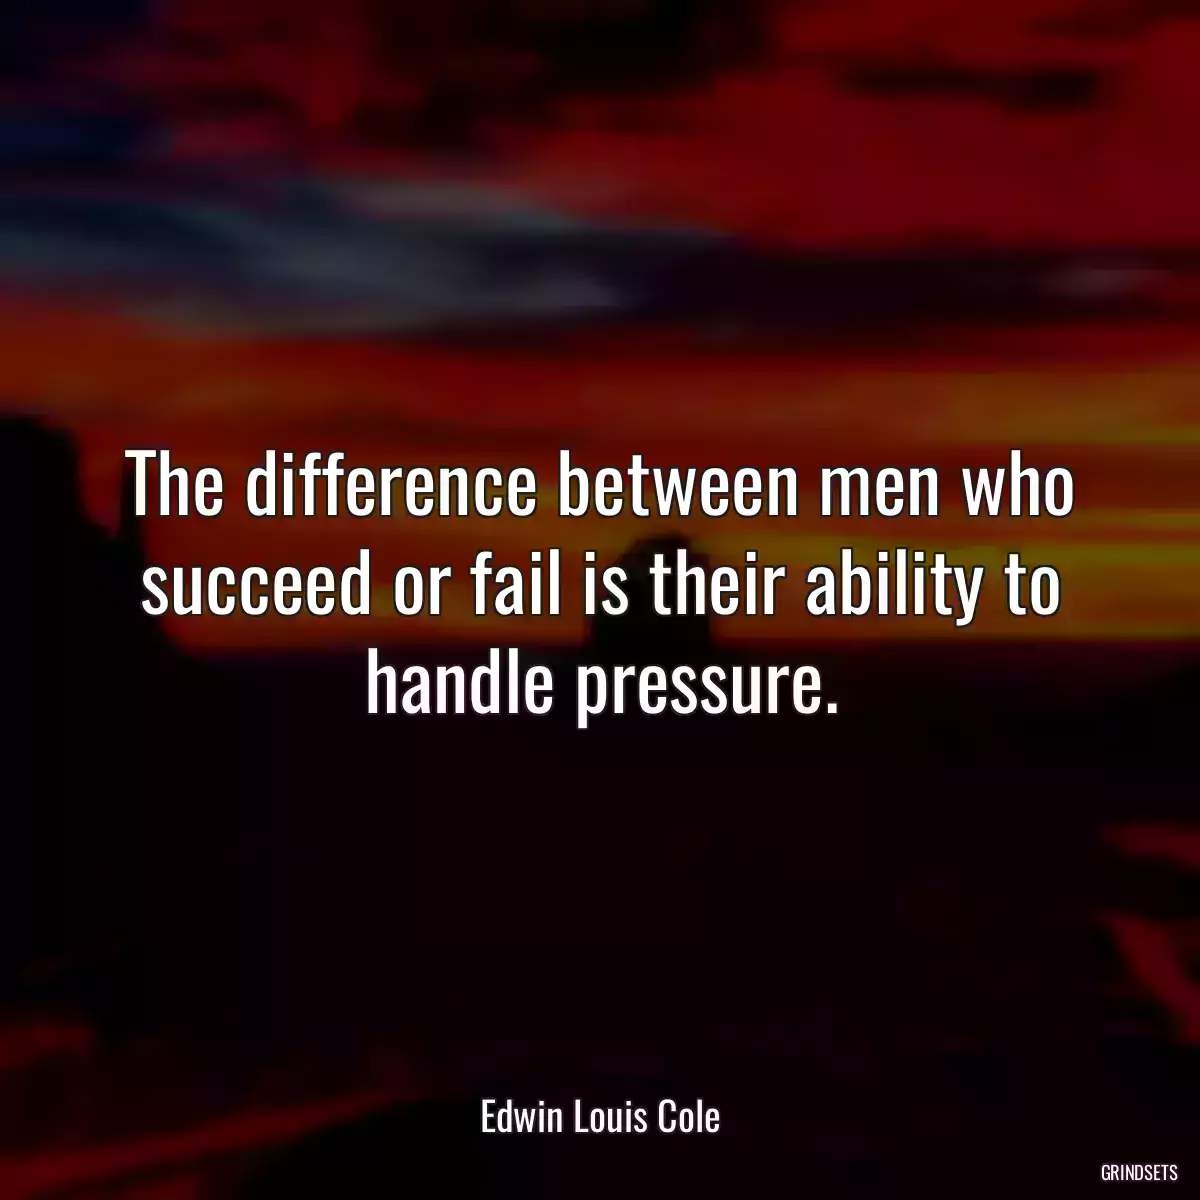 The difference between men who succeed or fail is their ability to handle pressure.